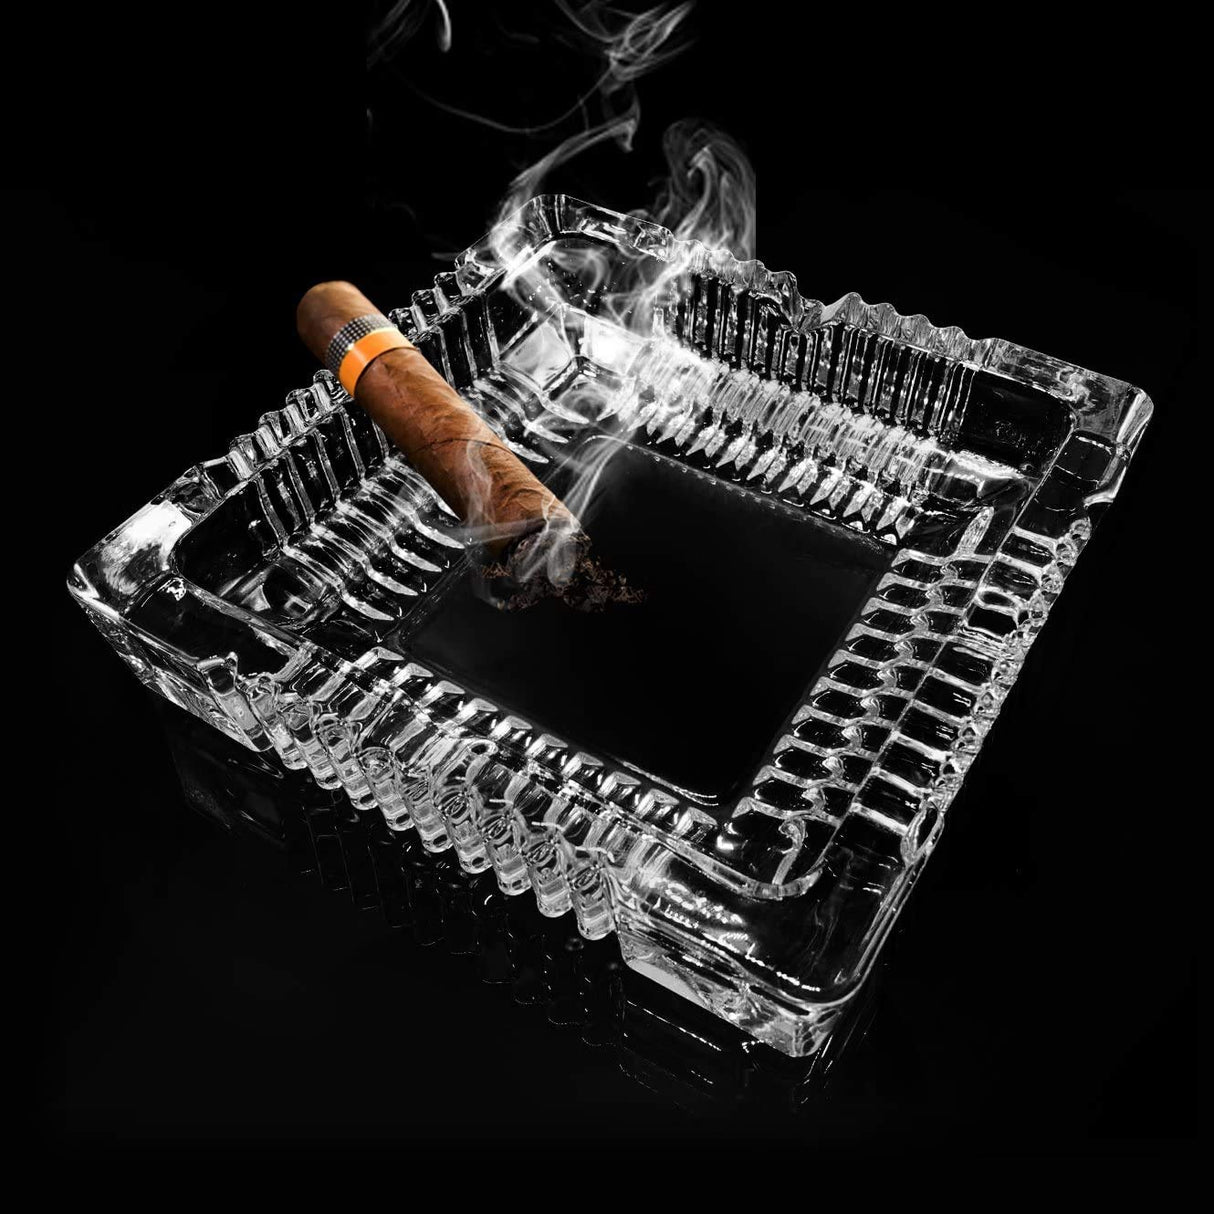 Ashtray, Large Glass Ashtray for cigarette cigar, Clear Crystal Ash trays Outdoor Glass Spuare Ashtrays (7x7inch)